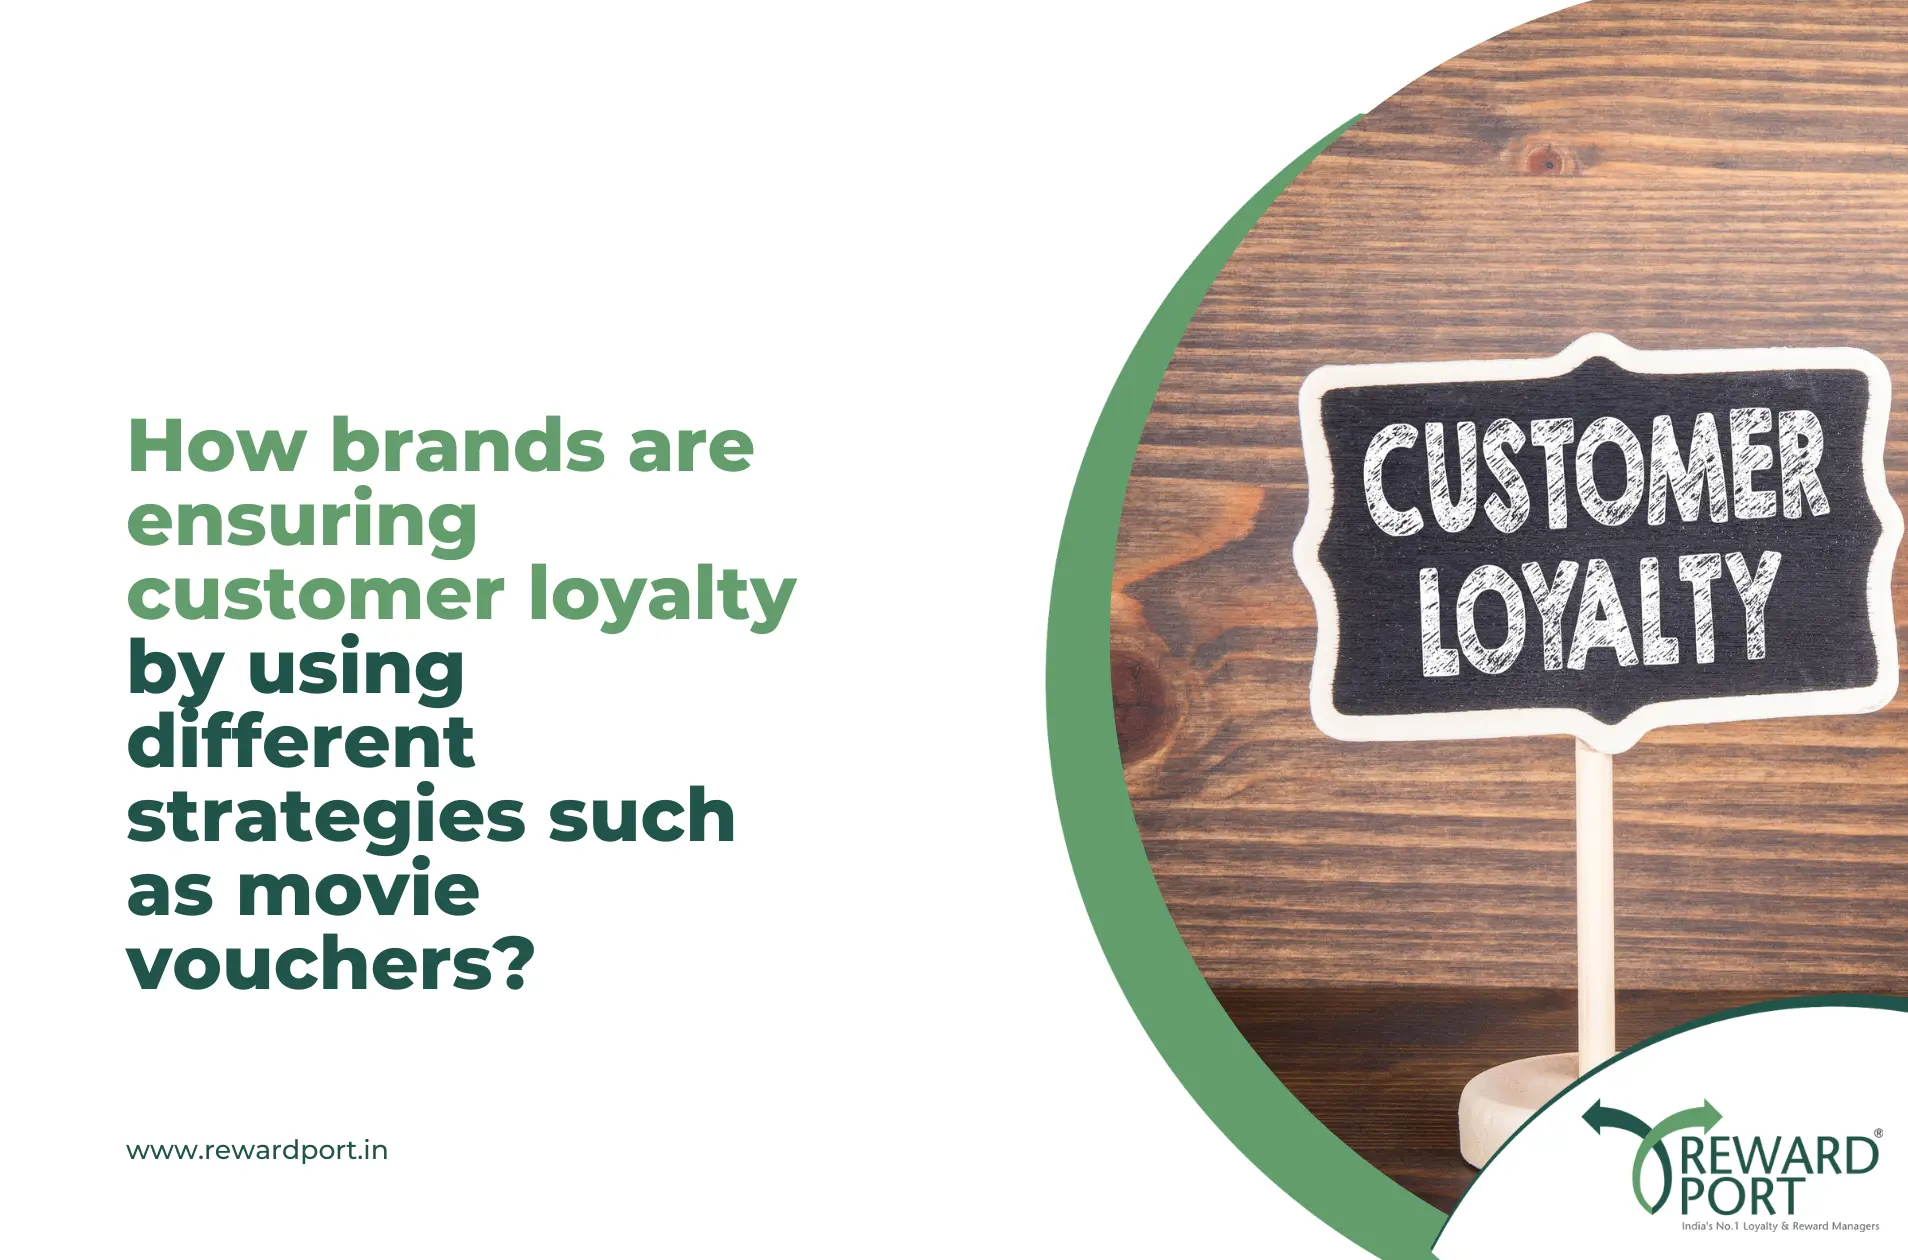 How brands are ensuring customer loyalty by using different strategies such as movie vouchers?